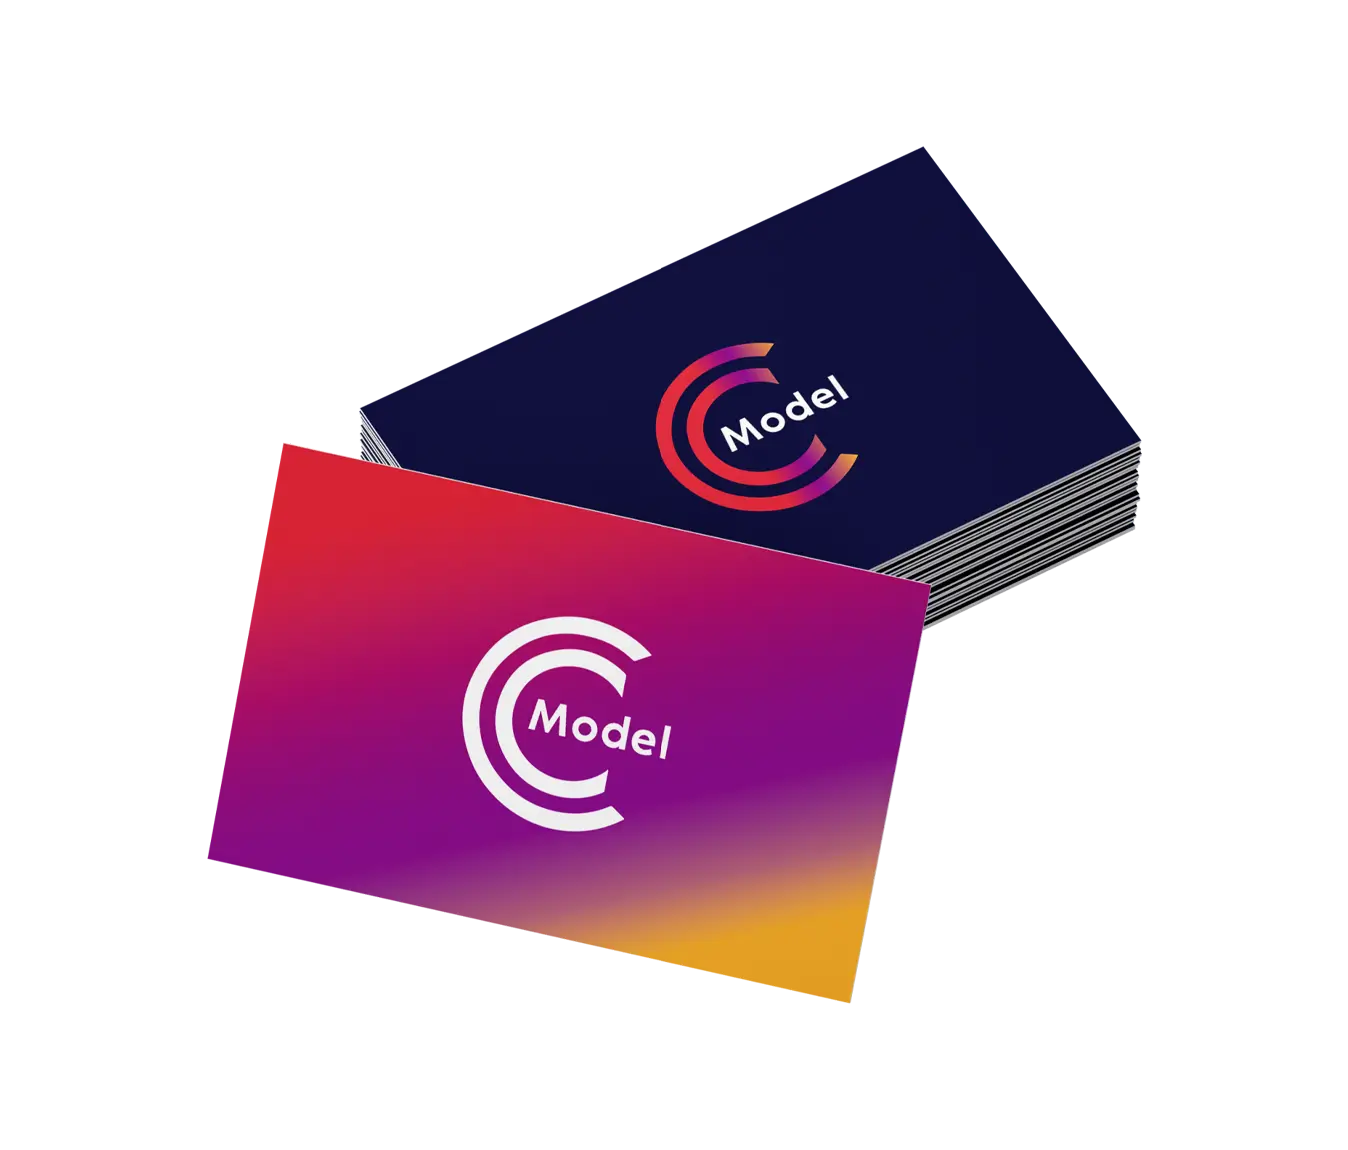 cmodel business-cards@2x